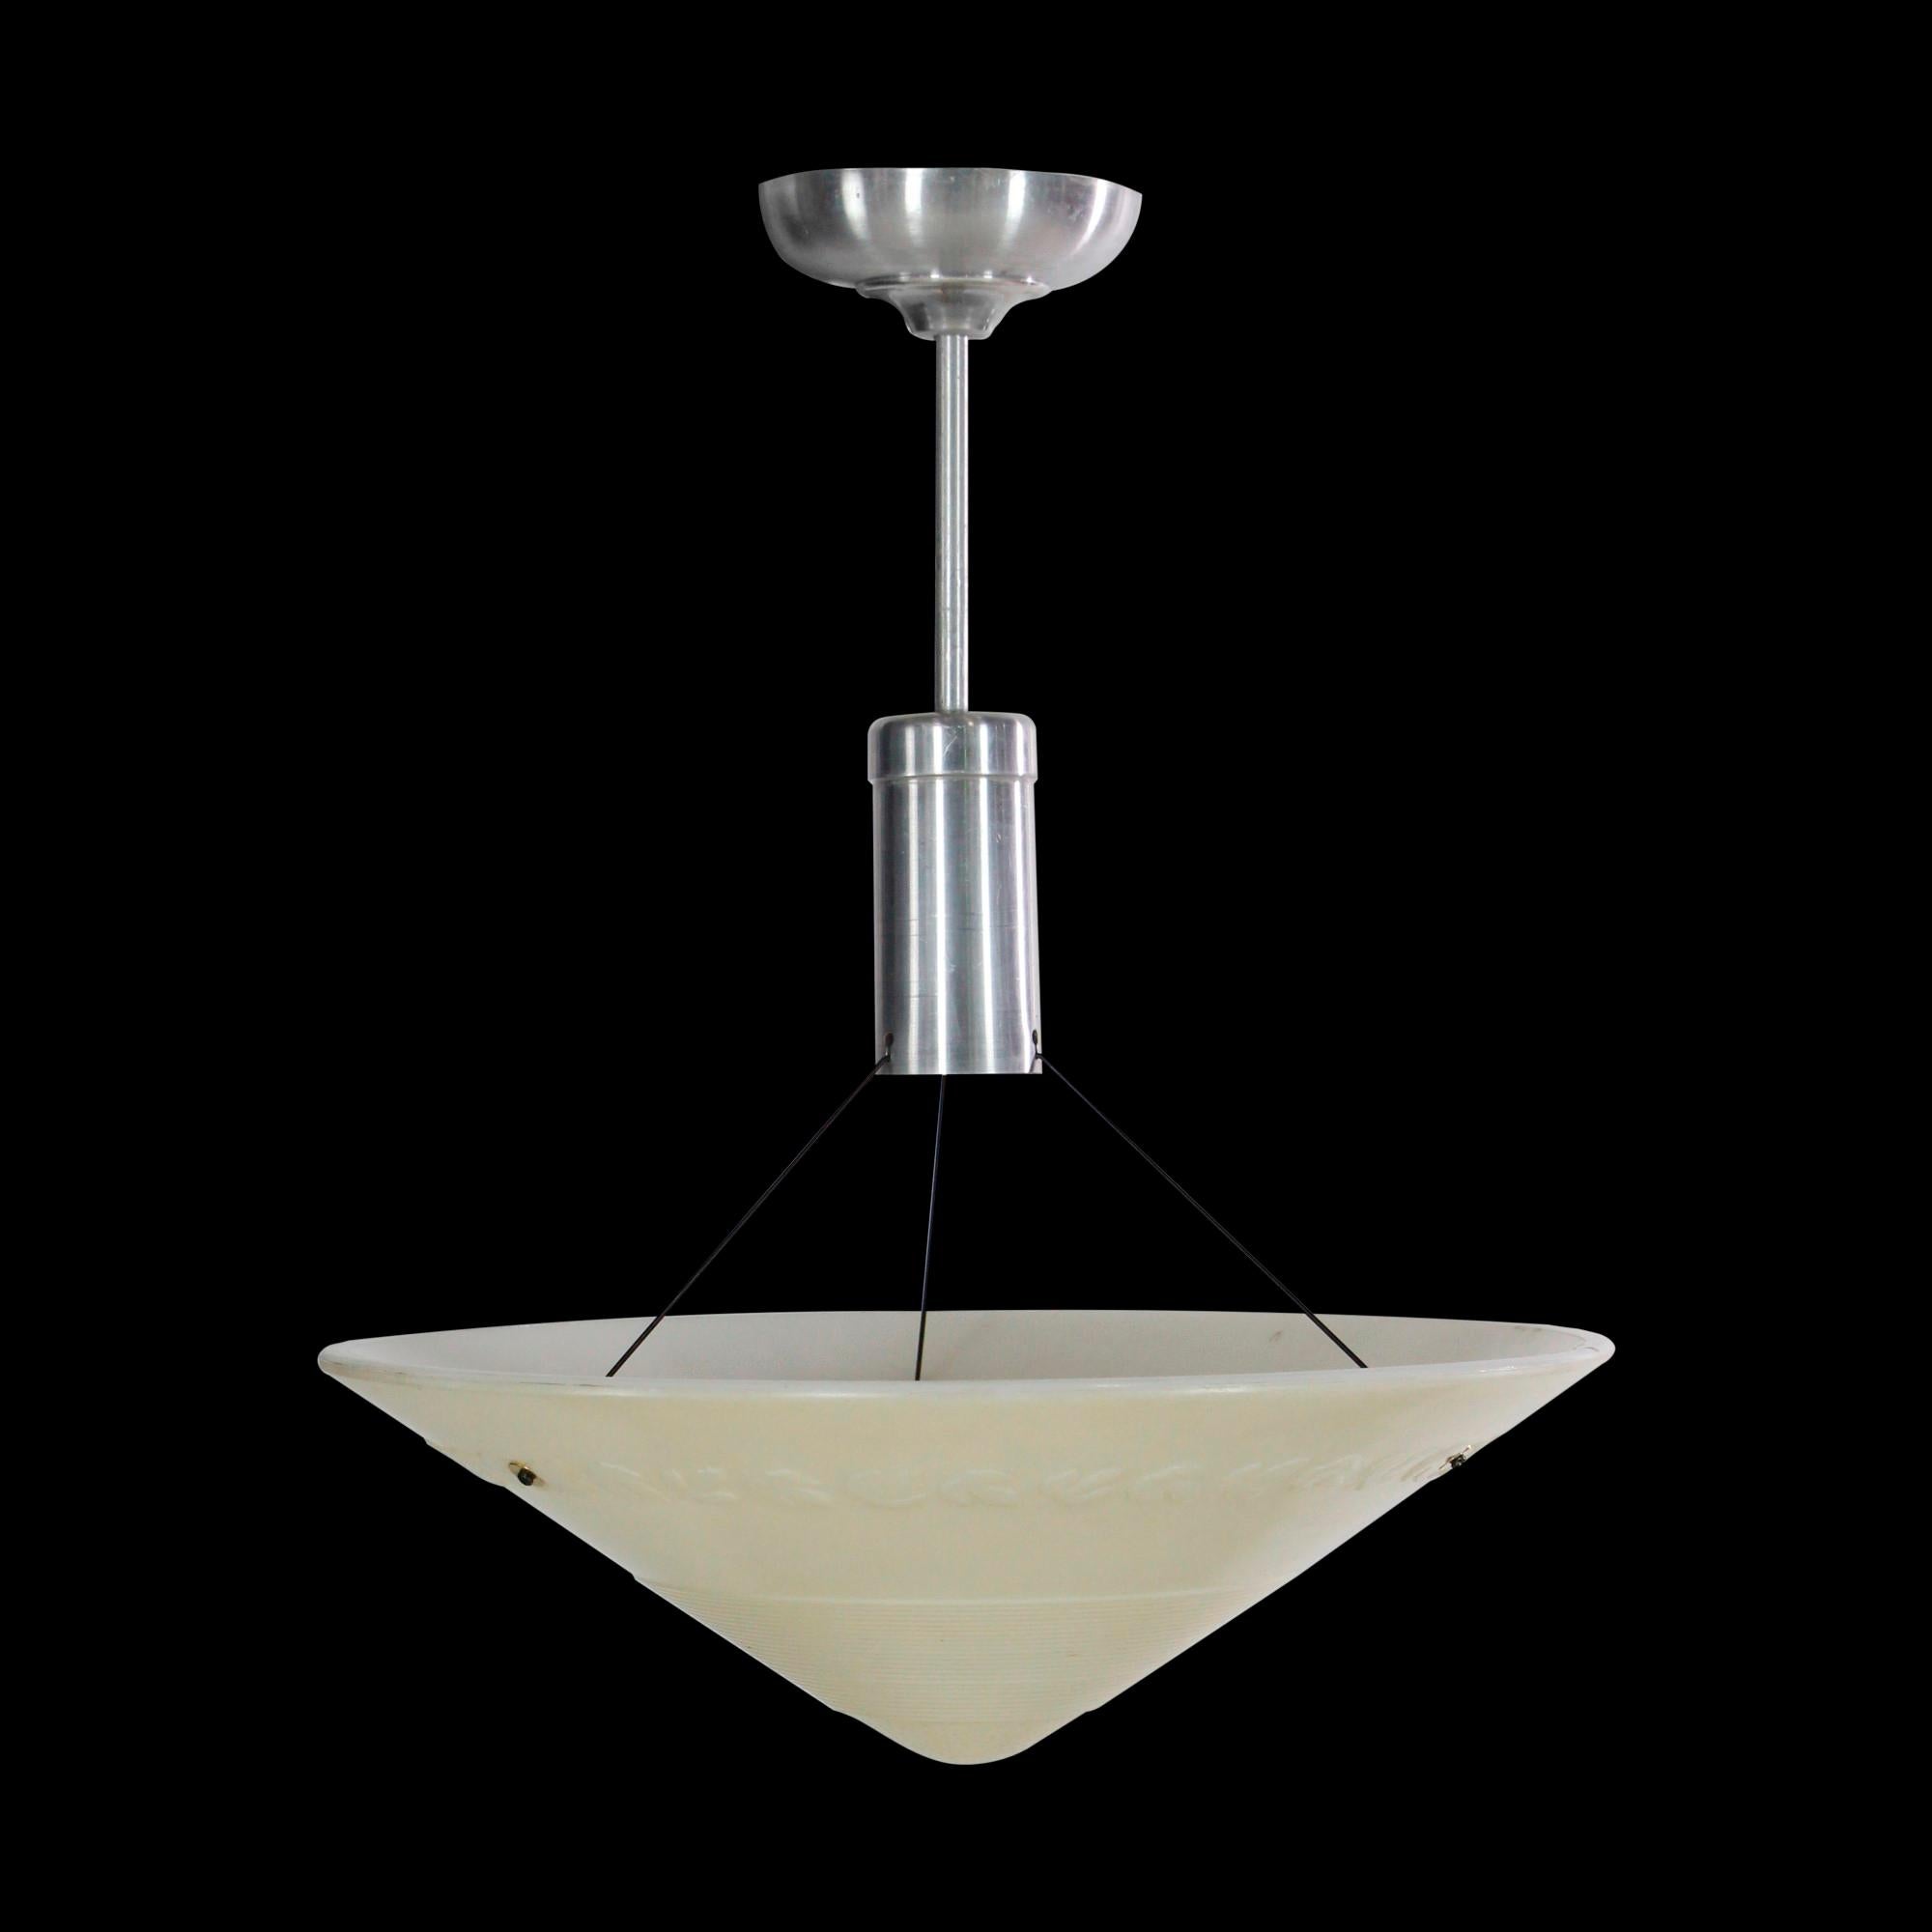 Streamline Moderne cone shaped milk glass pendant light suspended by an aluminum pole fitter. The 1950s shade gives indirect light and features line and leaf detail across the glass. Small quantity available at time of posting. Priced each. Please